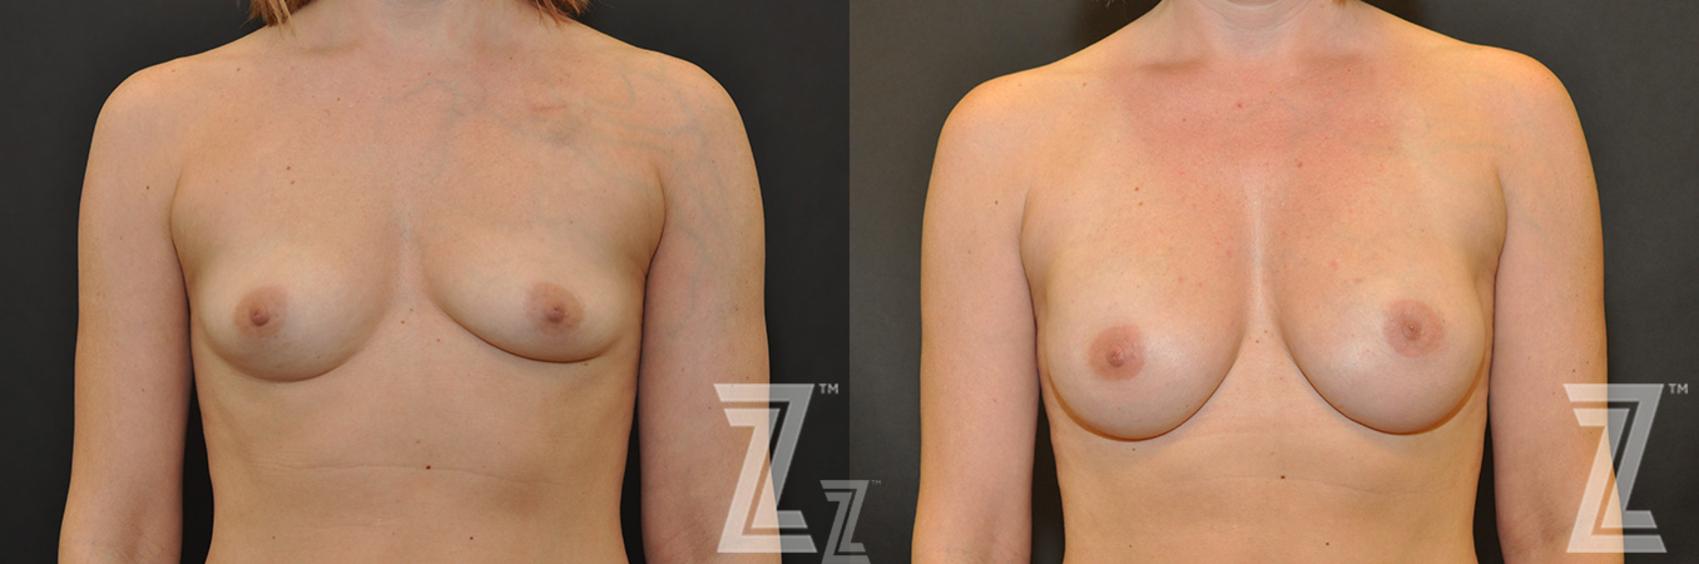 Breast Reconstruction Before & After Photo | Austin, TX | The Piazza Center for Plastic Surgery & Advanced Skin Care